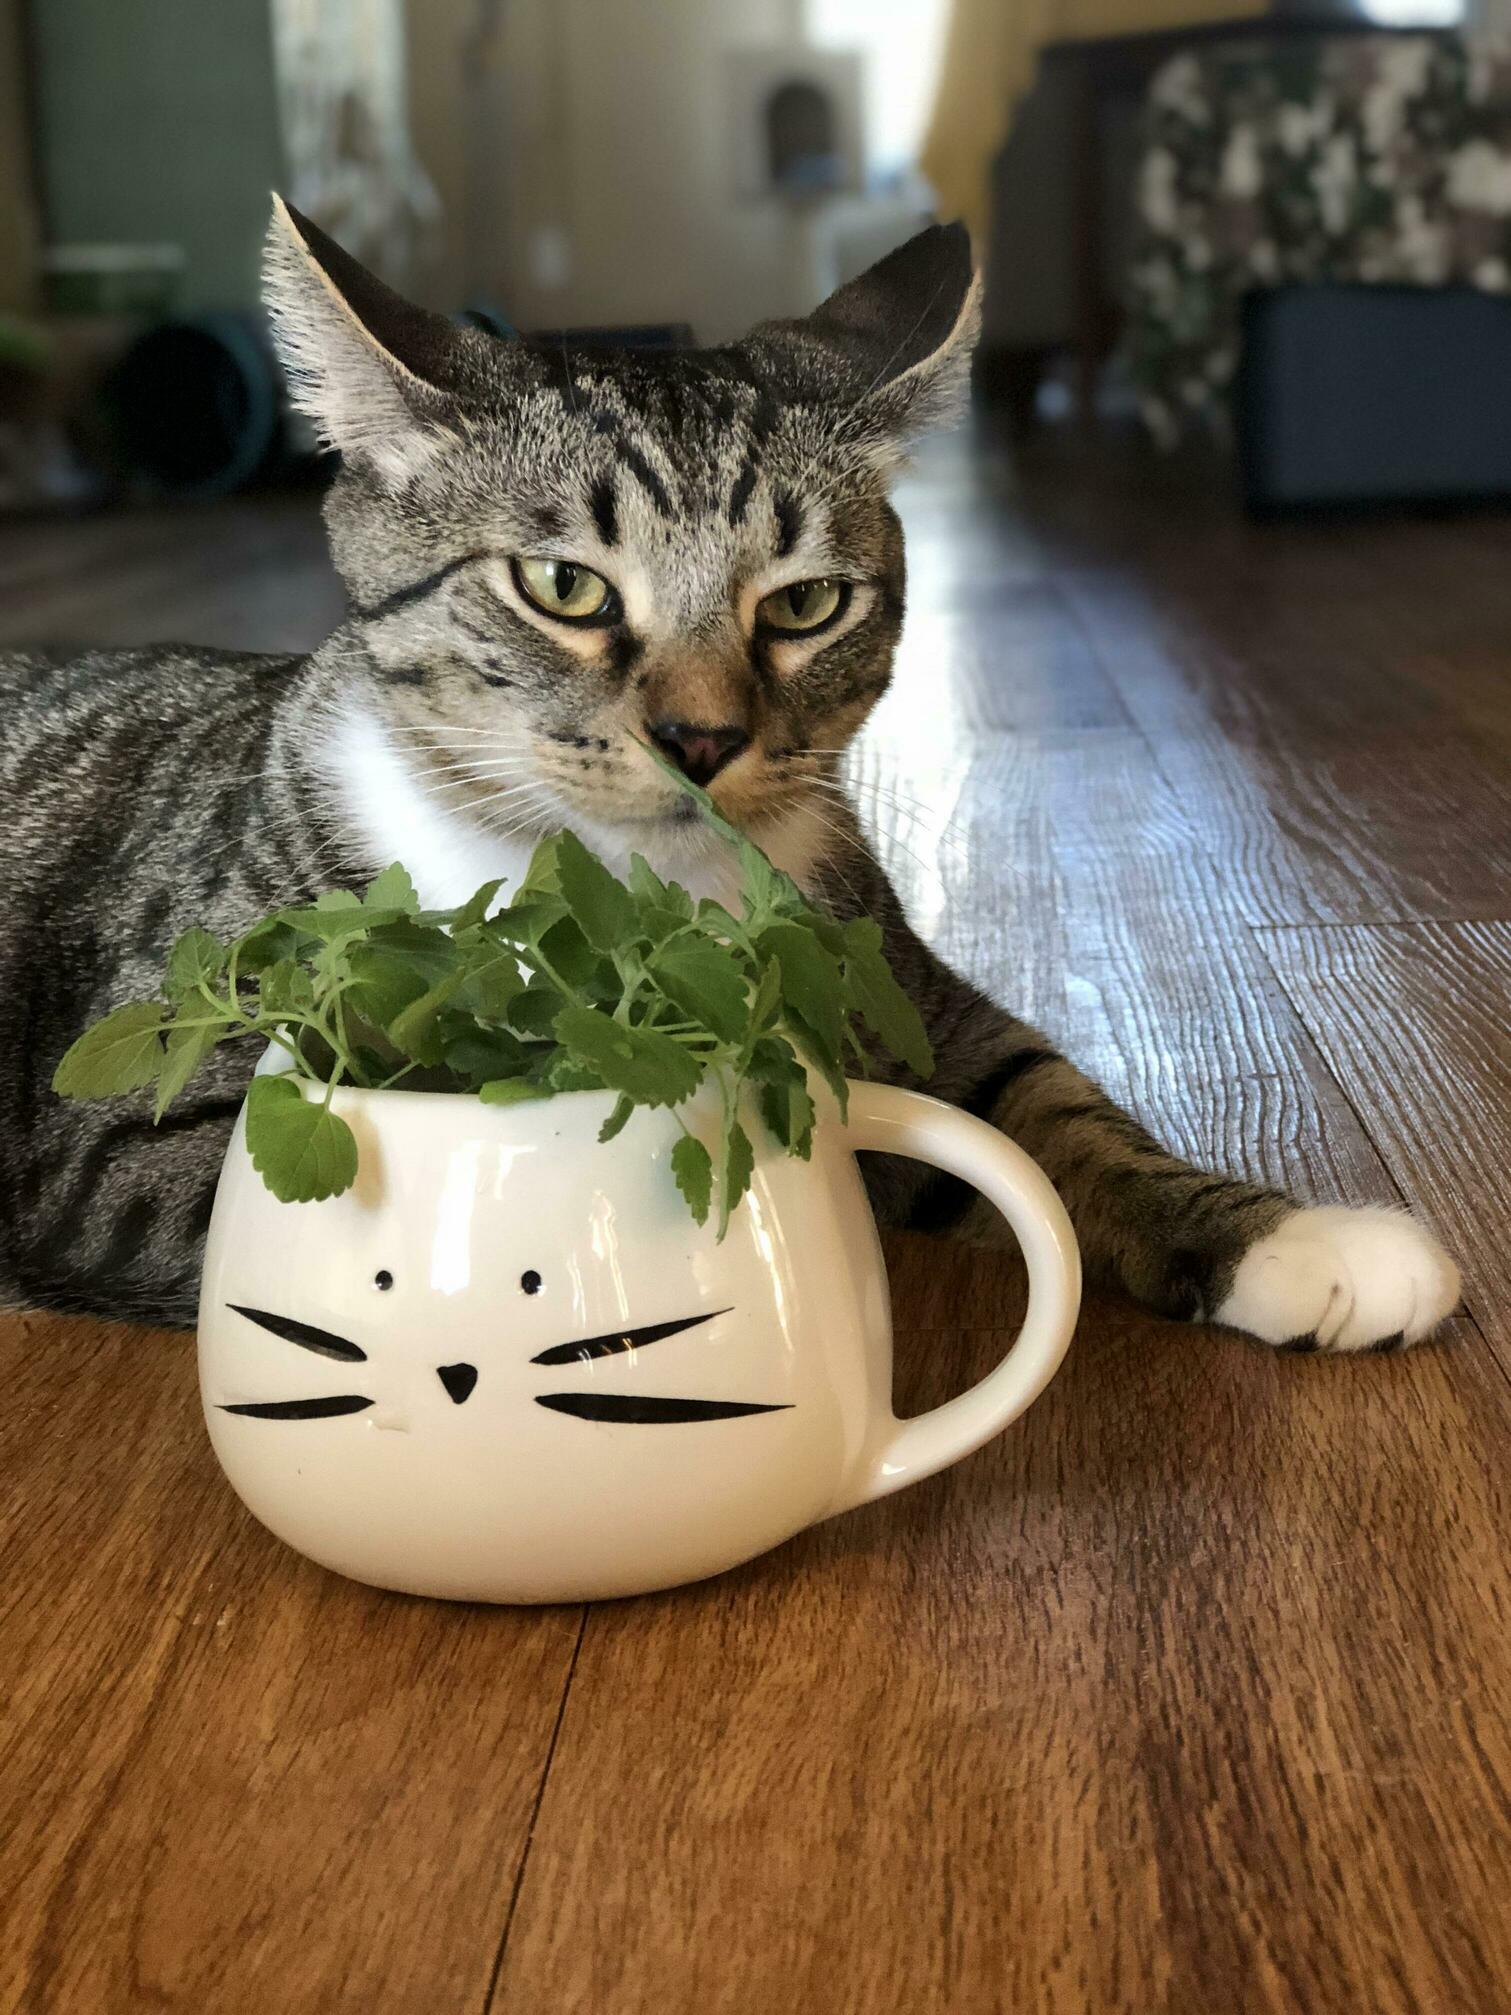 Just a cat chilling with his nip.